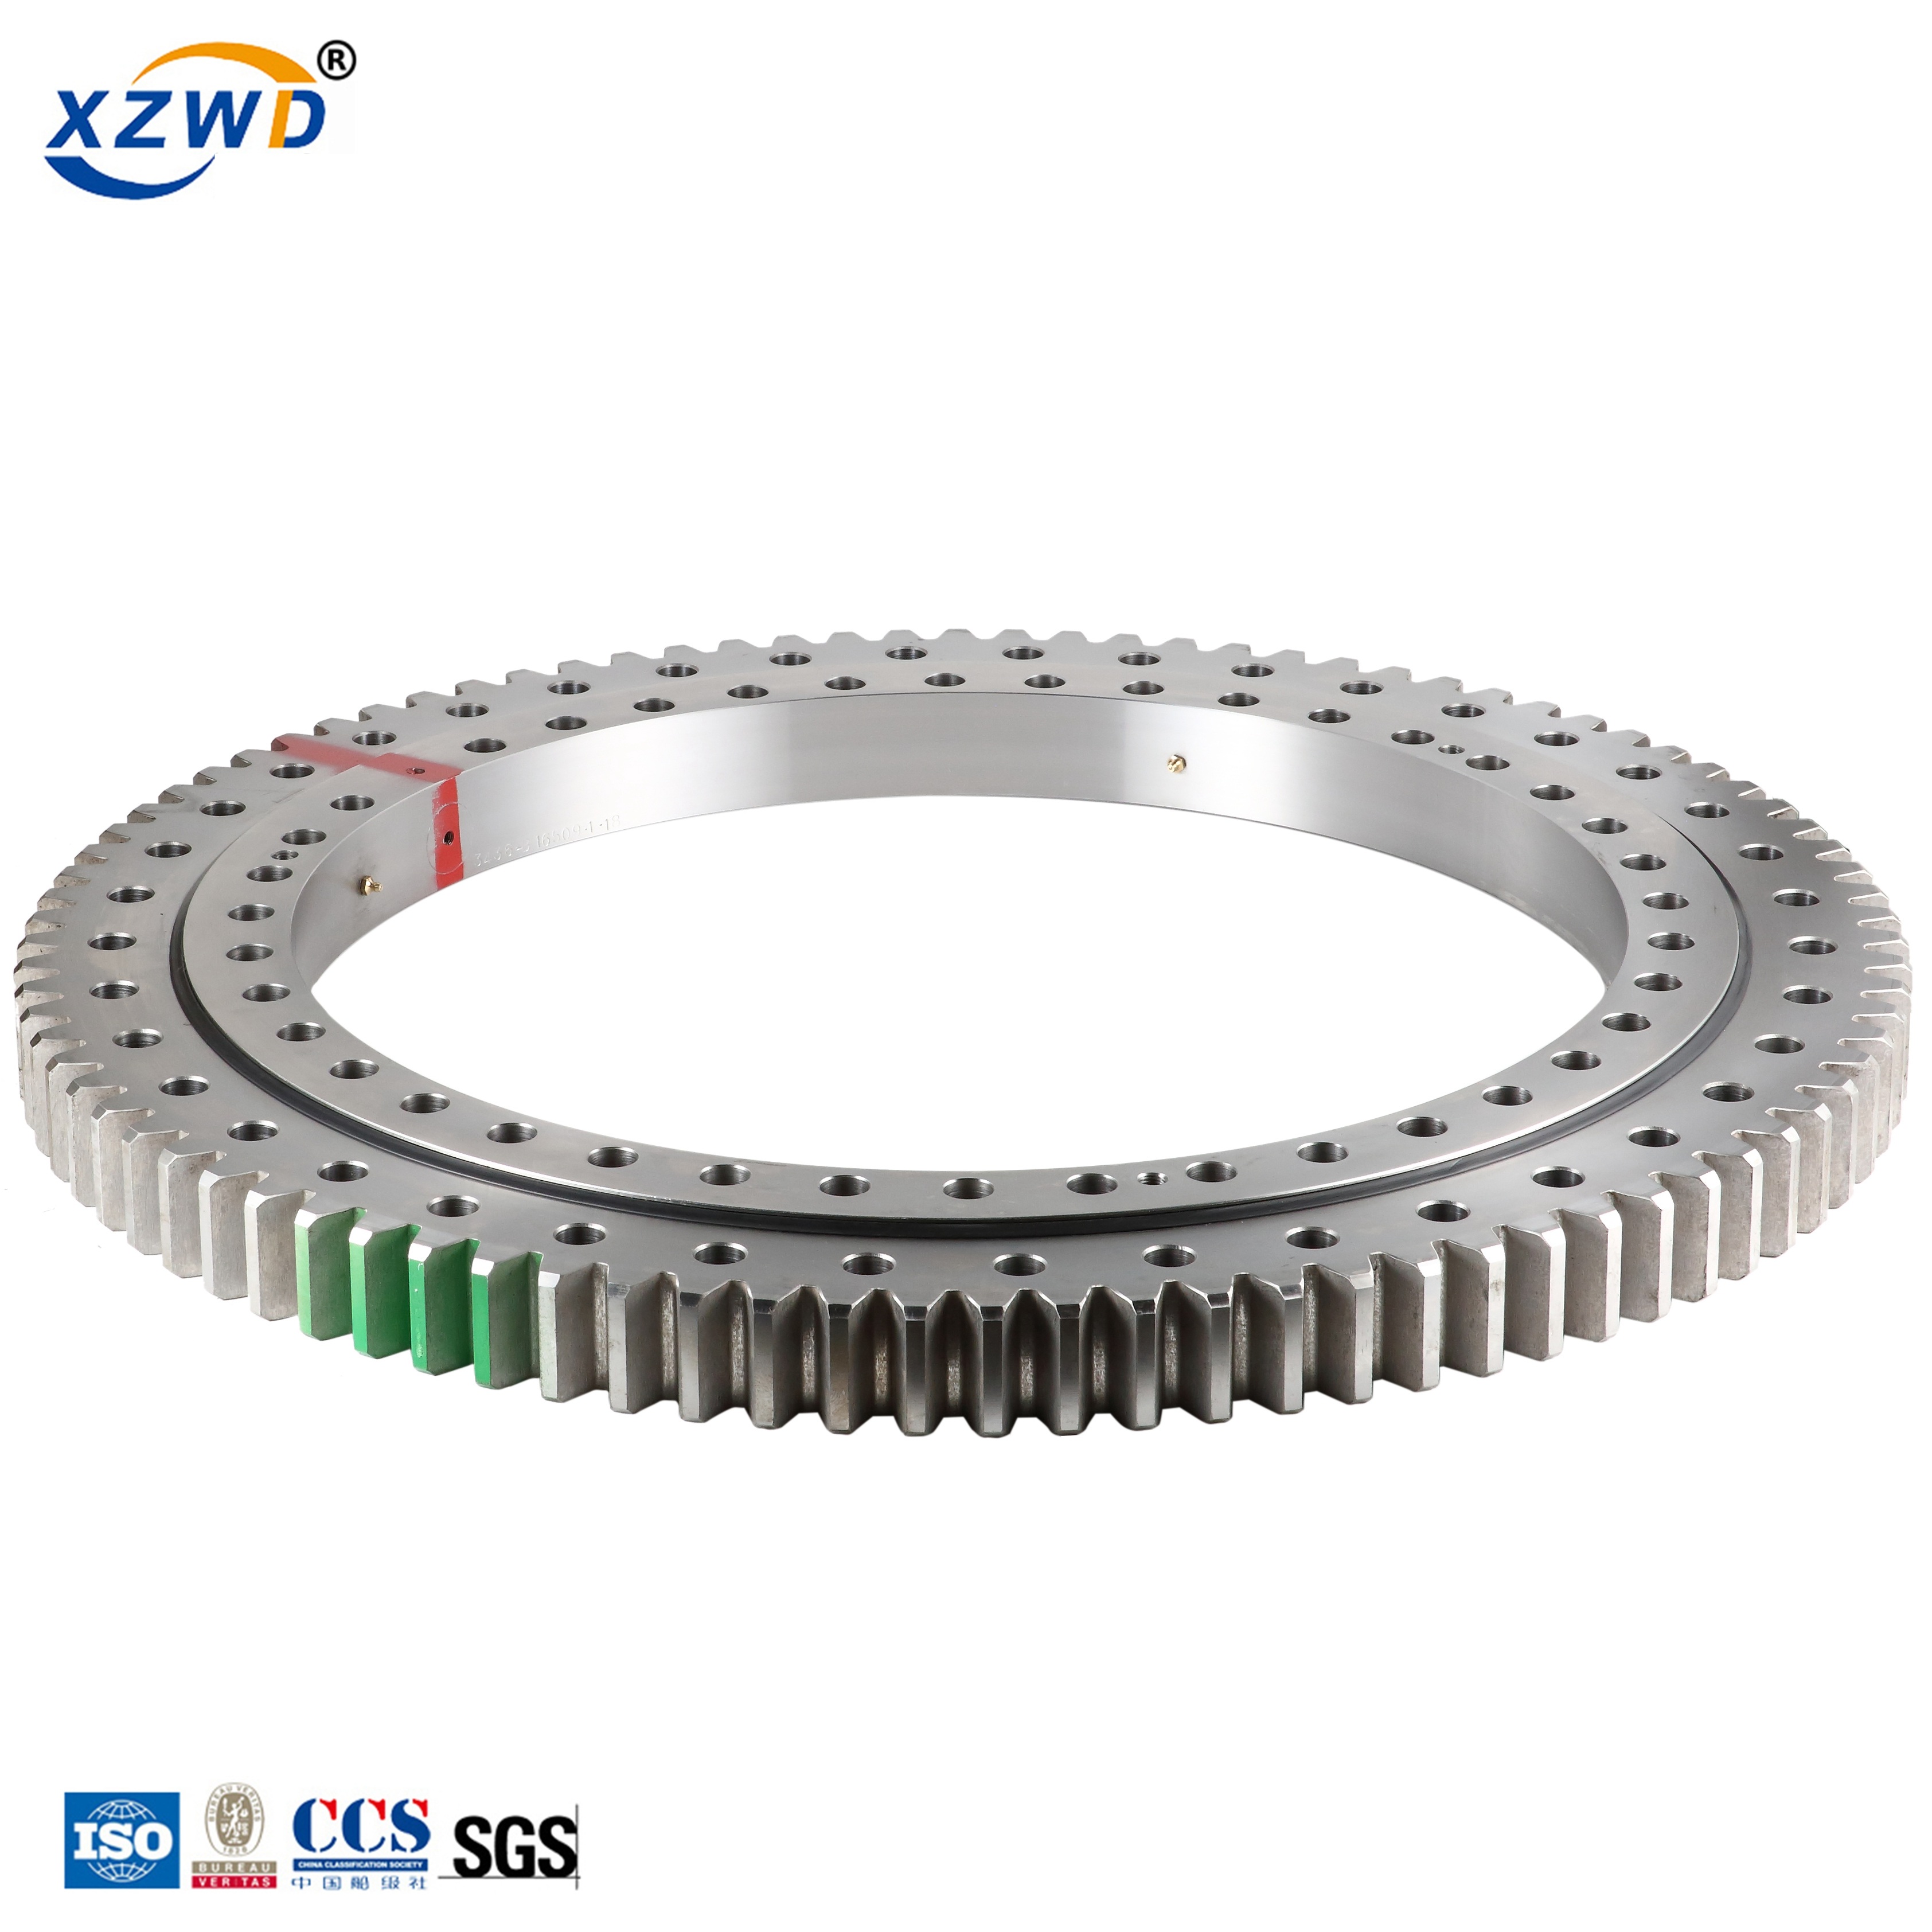 Zx200 Excavator Turntable Slewing Ring Bearing China Best Quality